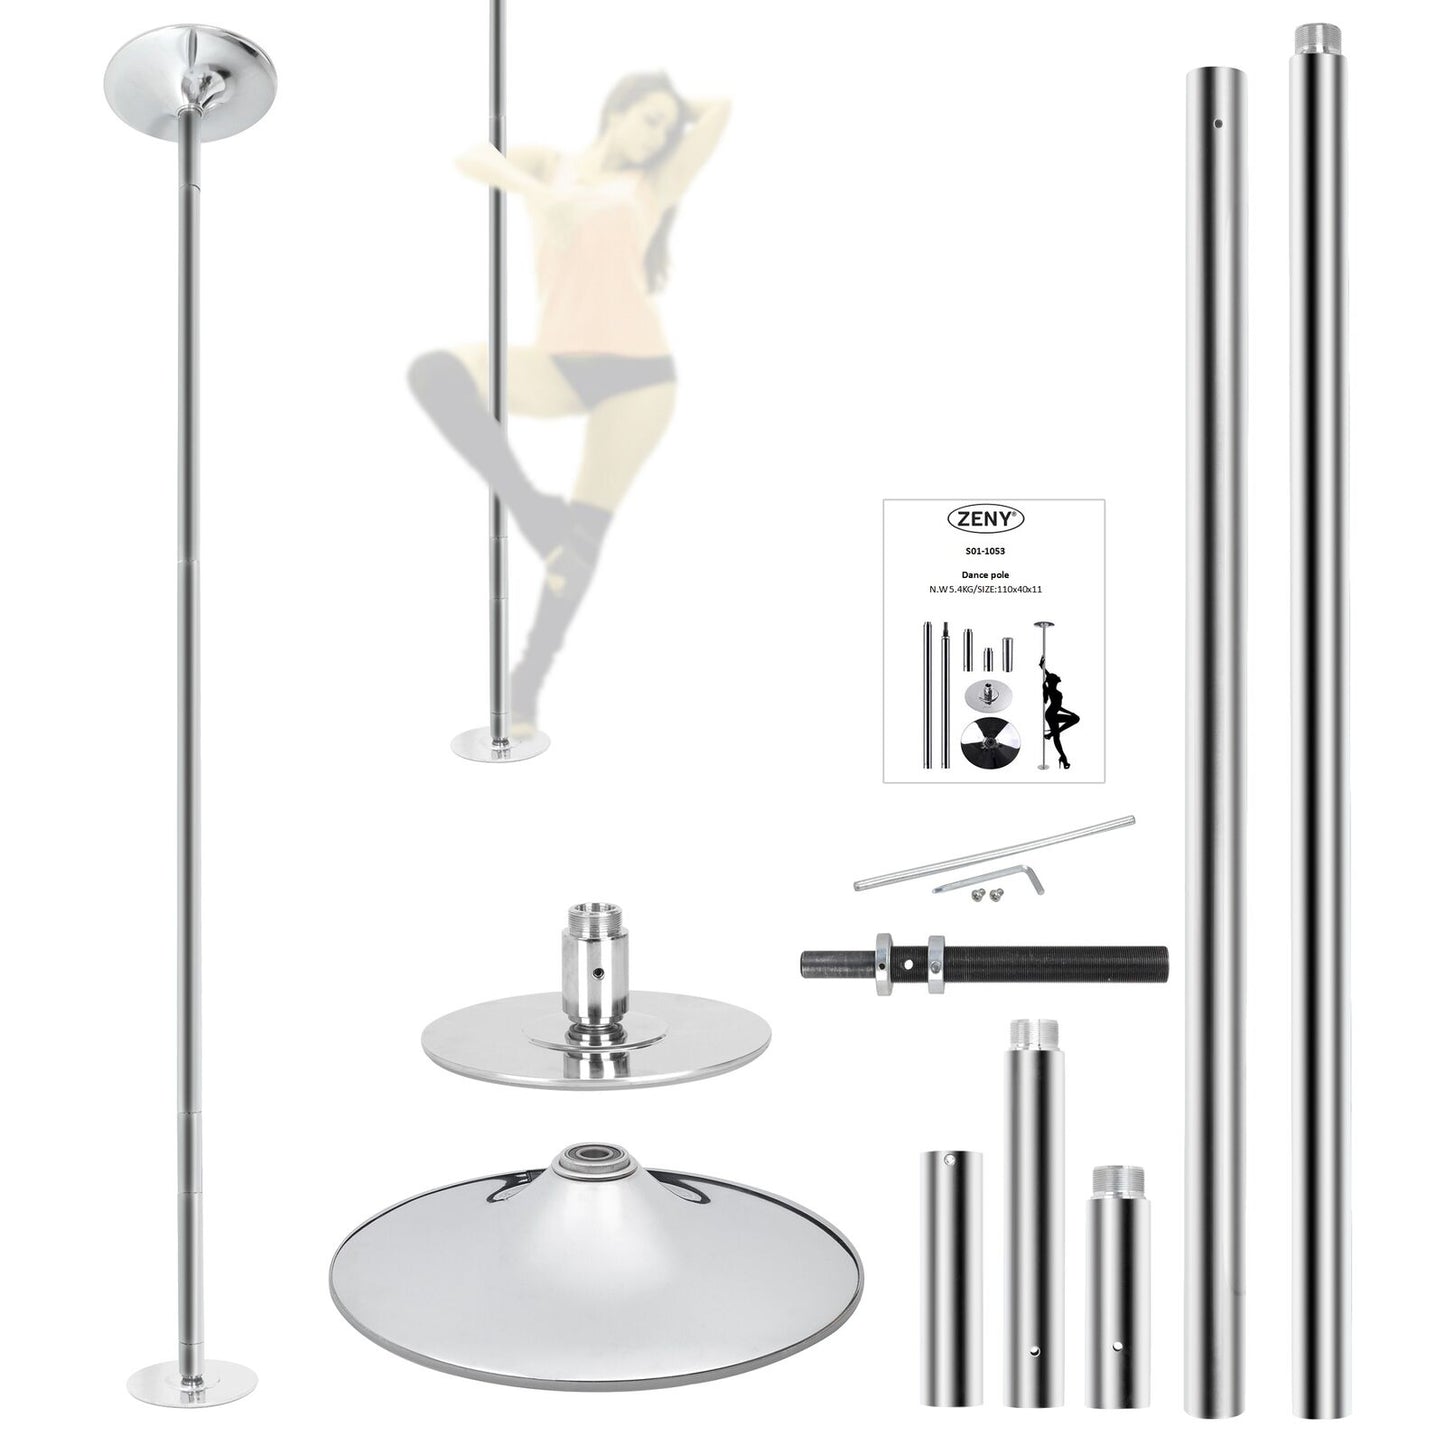 45mm Electroplated Chrome Finish Dance Pole Full Kit Removable Stripper Dancing